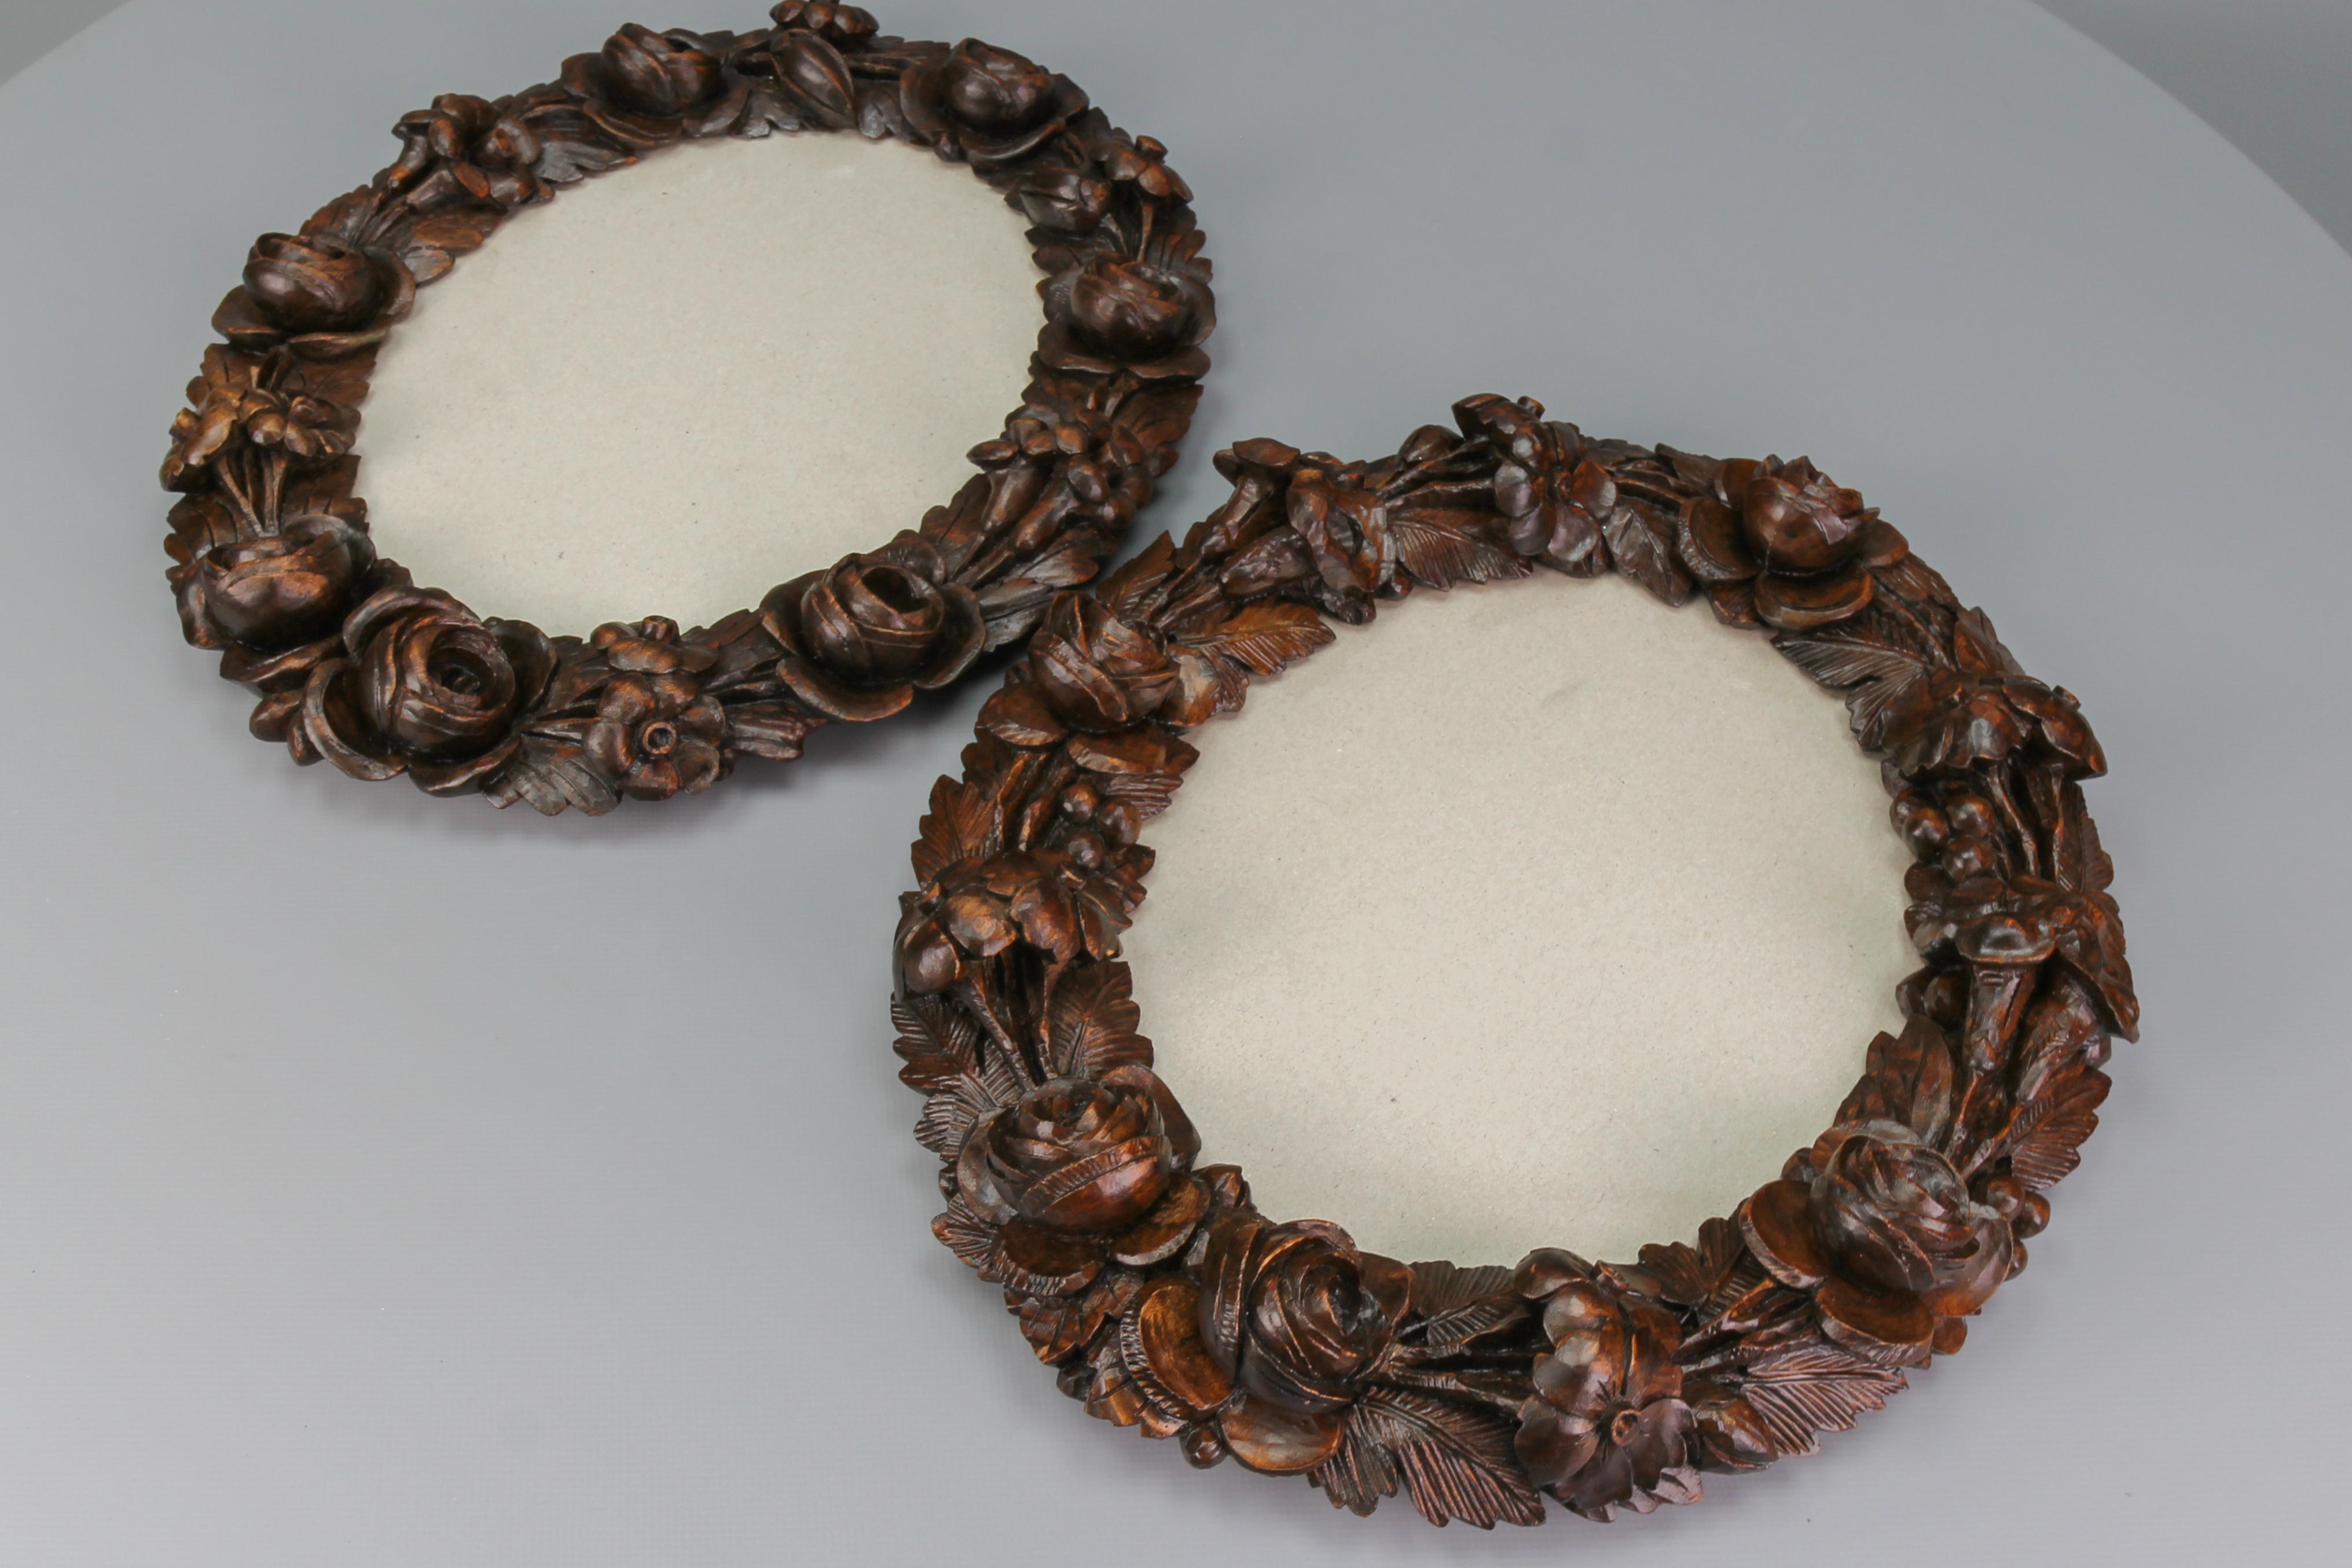 Pair of finely carved walnut oval dark brown wall picture or photo frames with flowers and leaves, Austria, ca. 1920.
The impressive pair of frames is masterfully carved throughout with a variety of interlocking flowers and foliage and has a glass